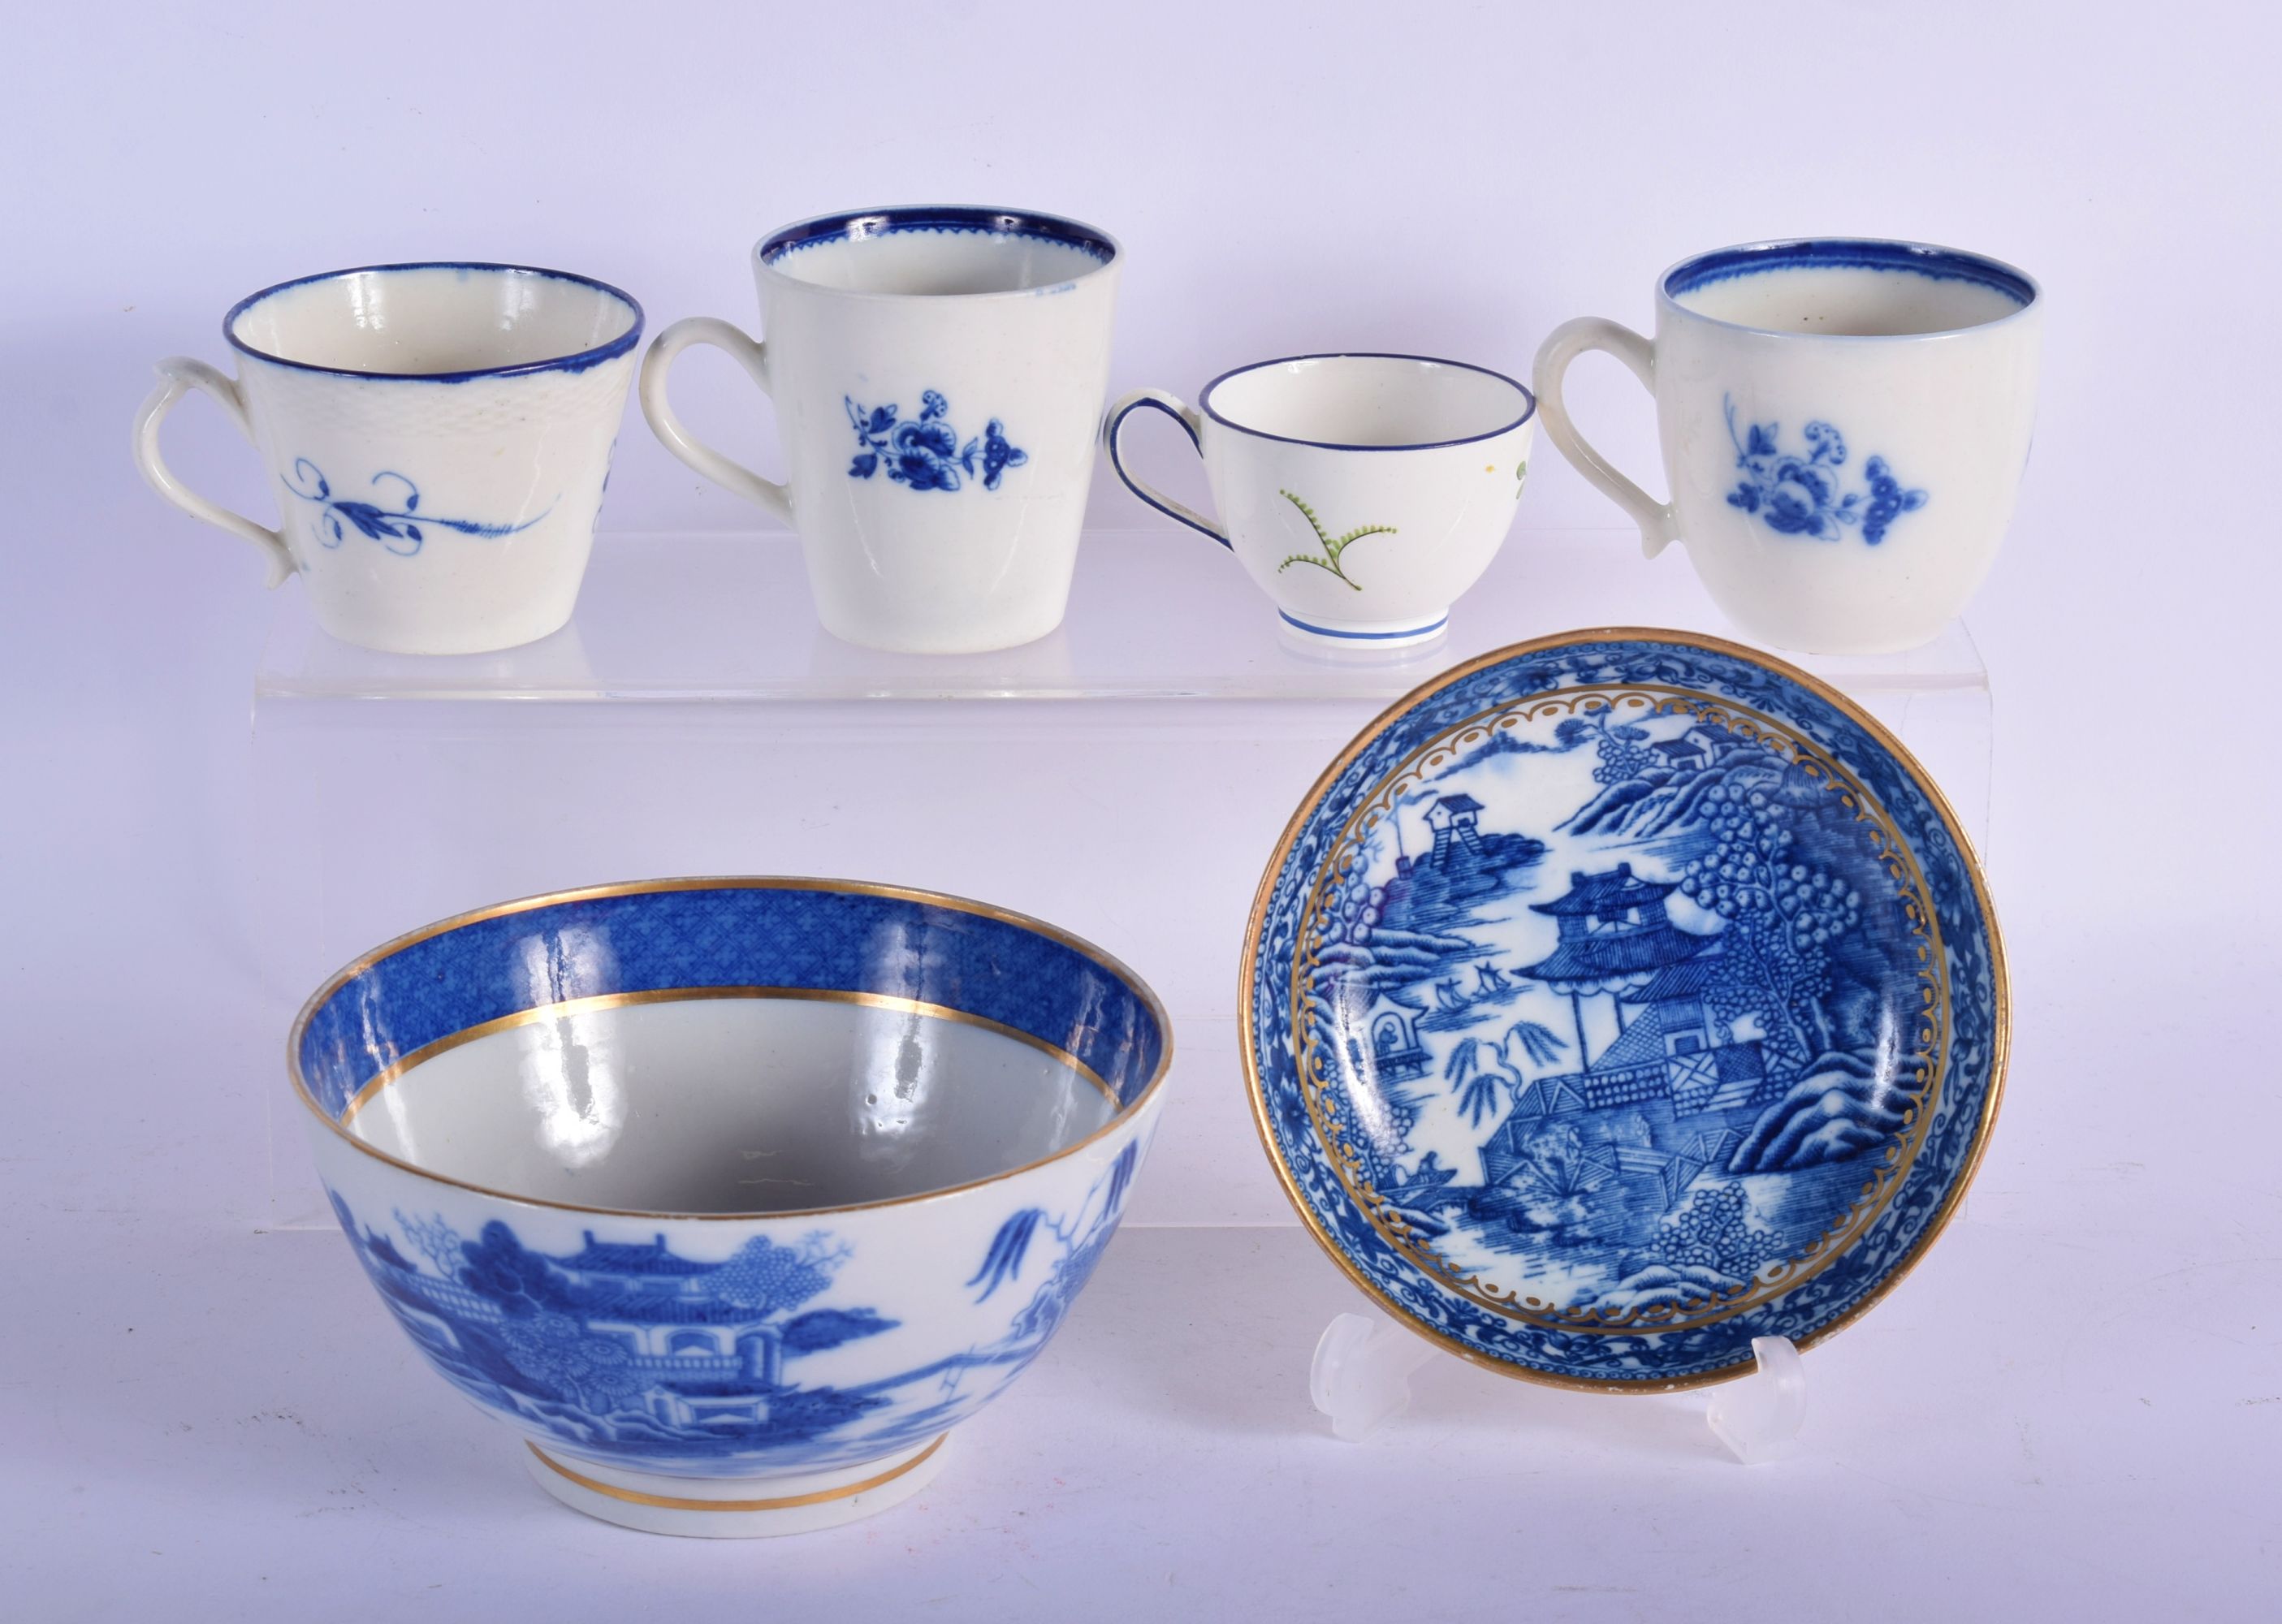 THREE LATE 18TH CENTURY CAUGHLEY BLUE AND WHITE CUPS, with a Caughley Fenced Garden Pattern Saucer - Image 12 of 12